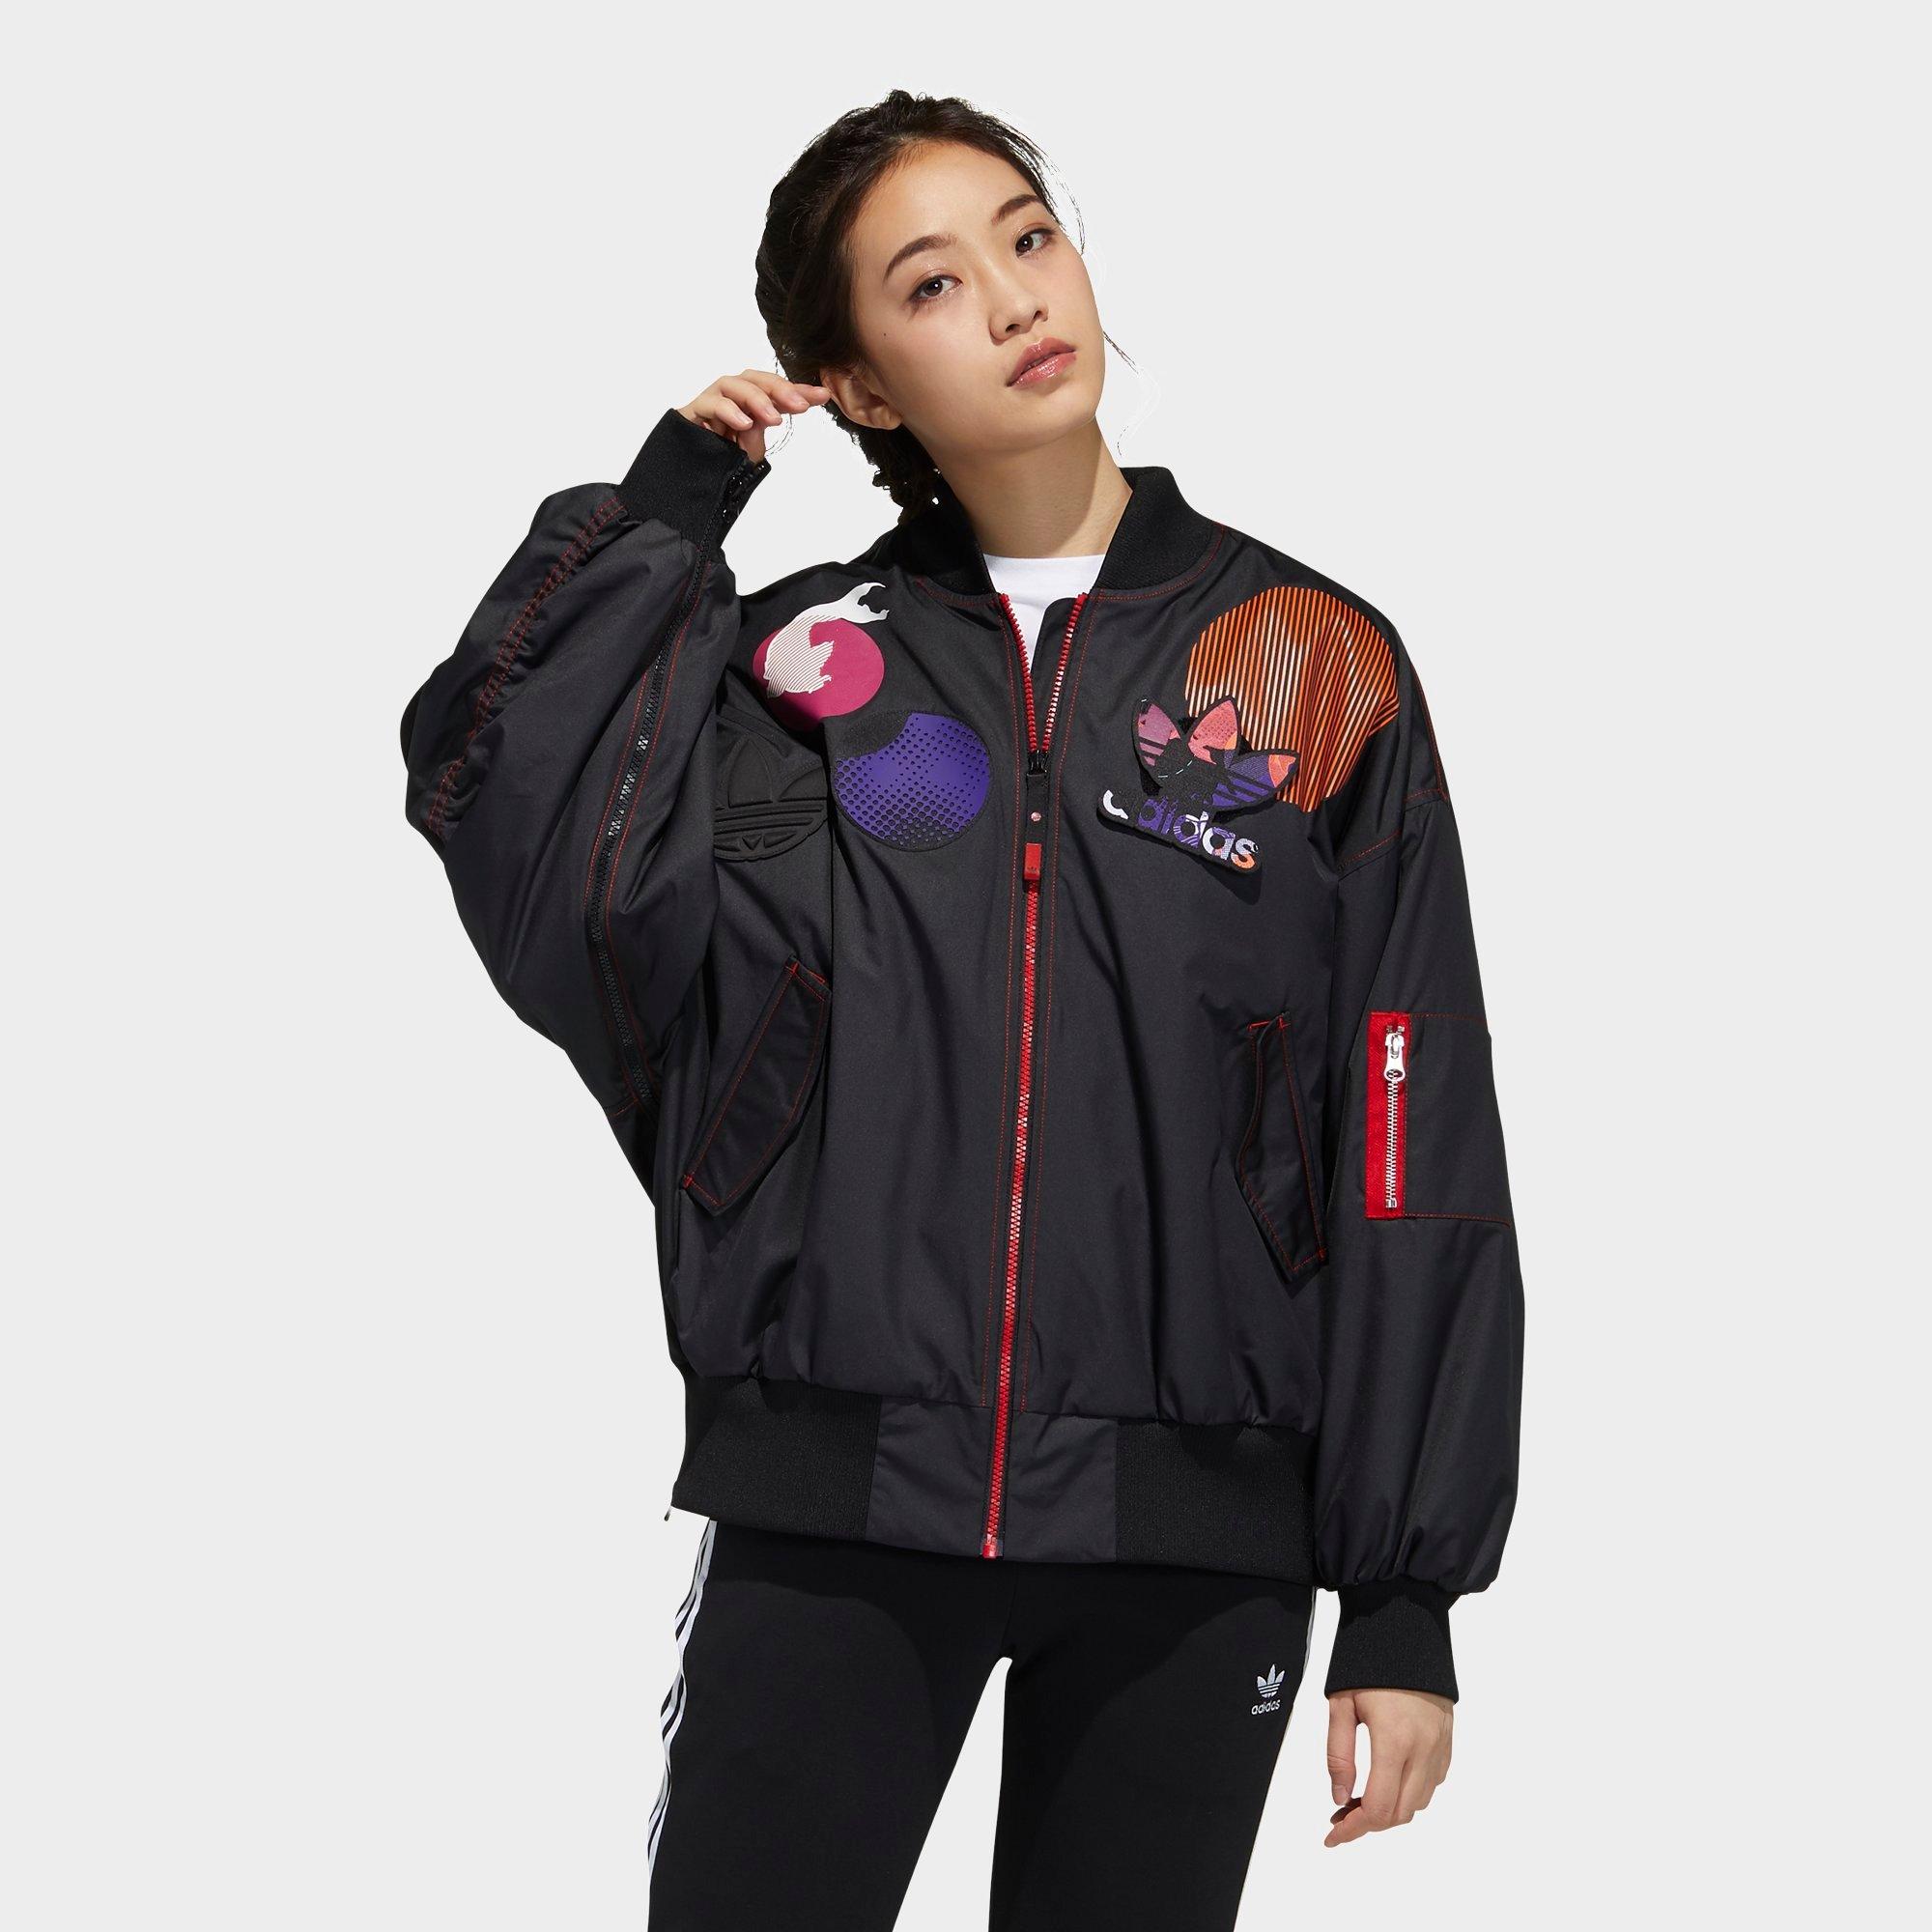 adidas originals bomber jacket with patches